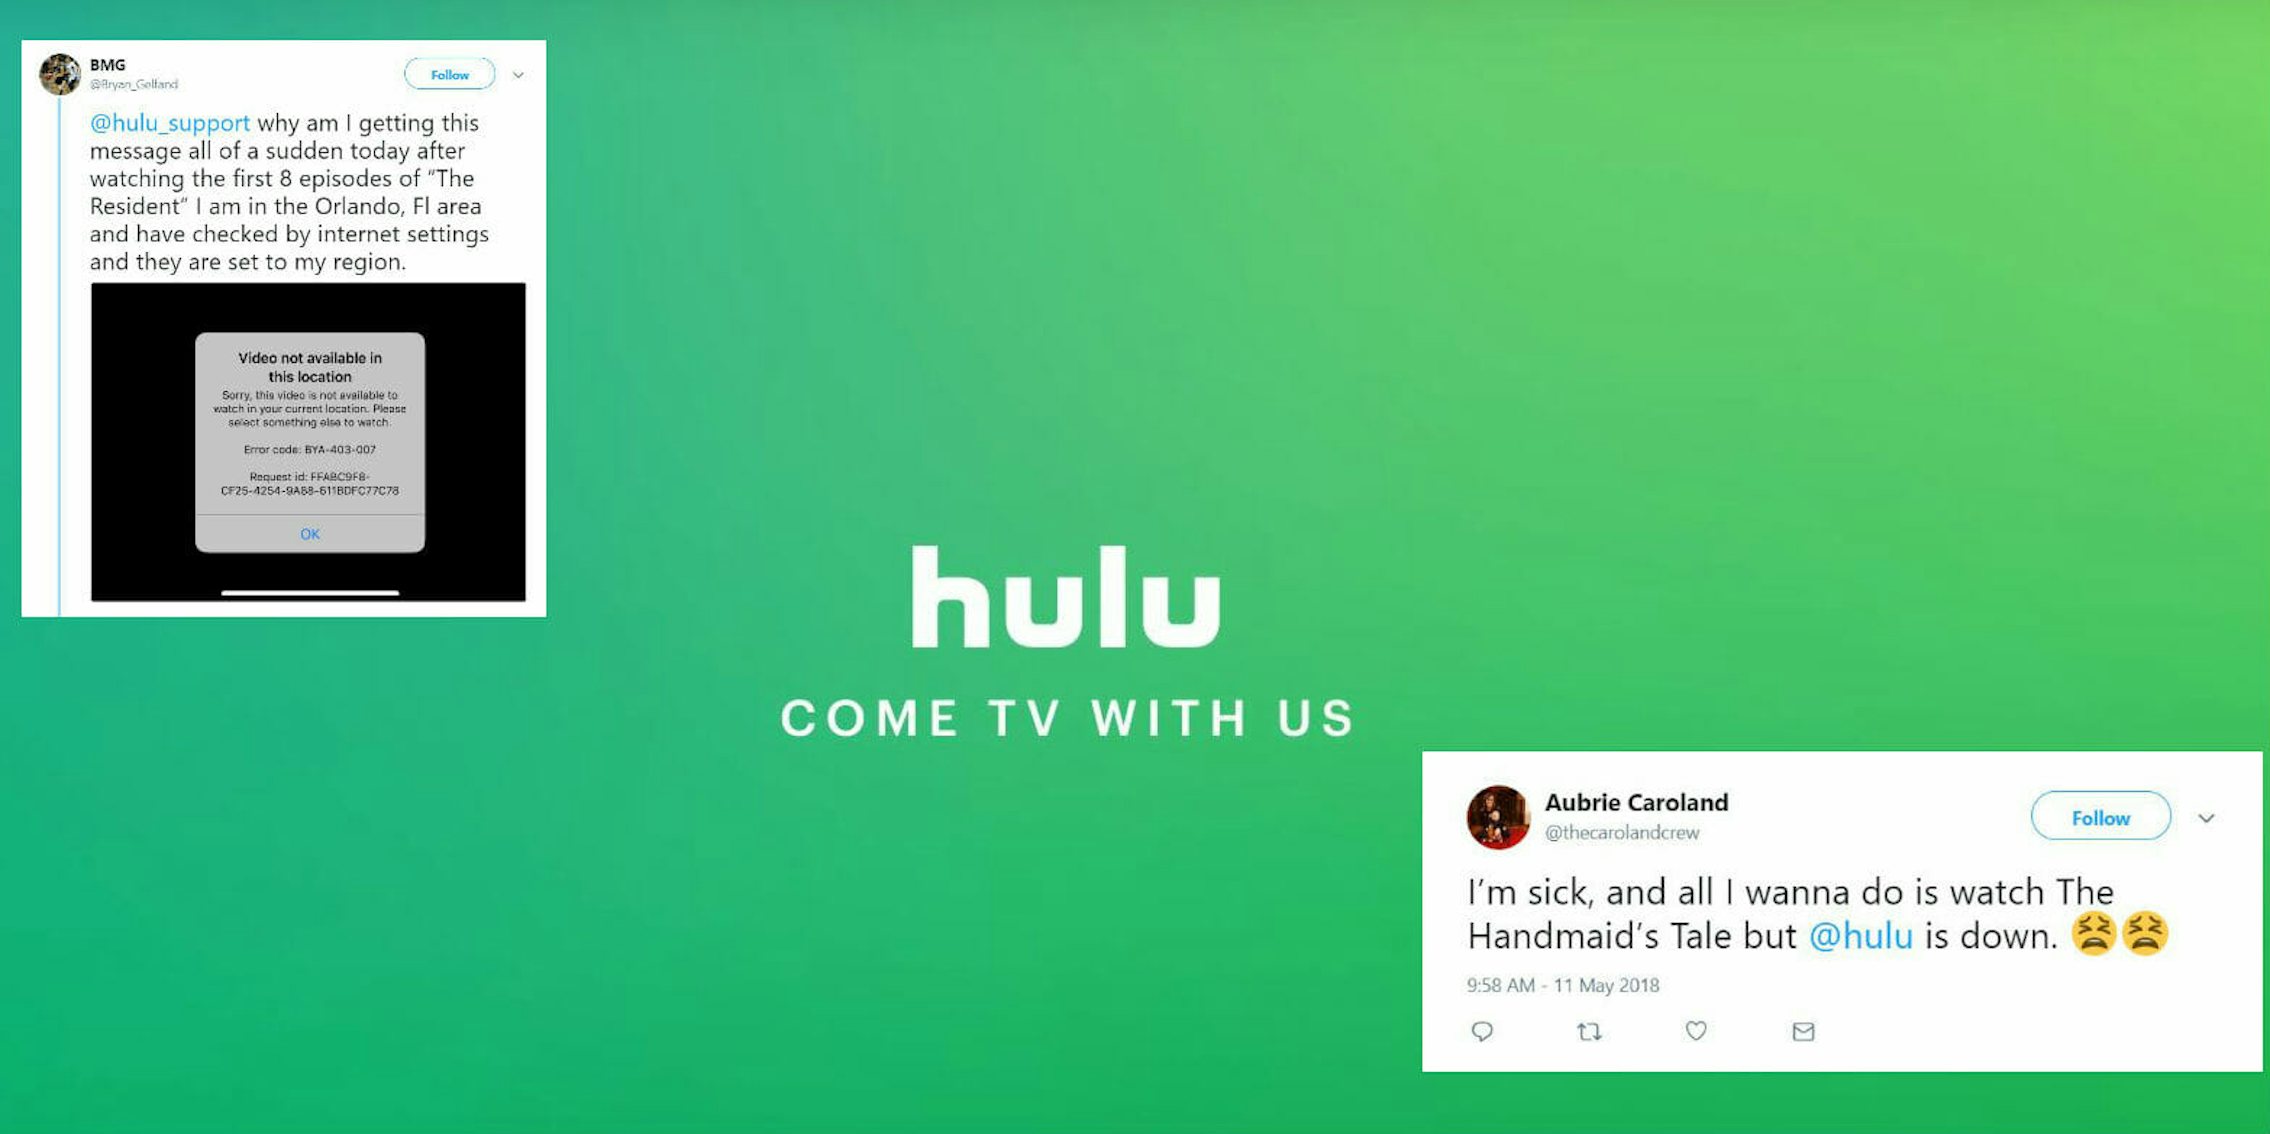 Hulu Confirms 'Technical Issue' is Causing Widespread Outage